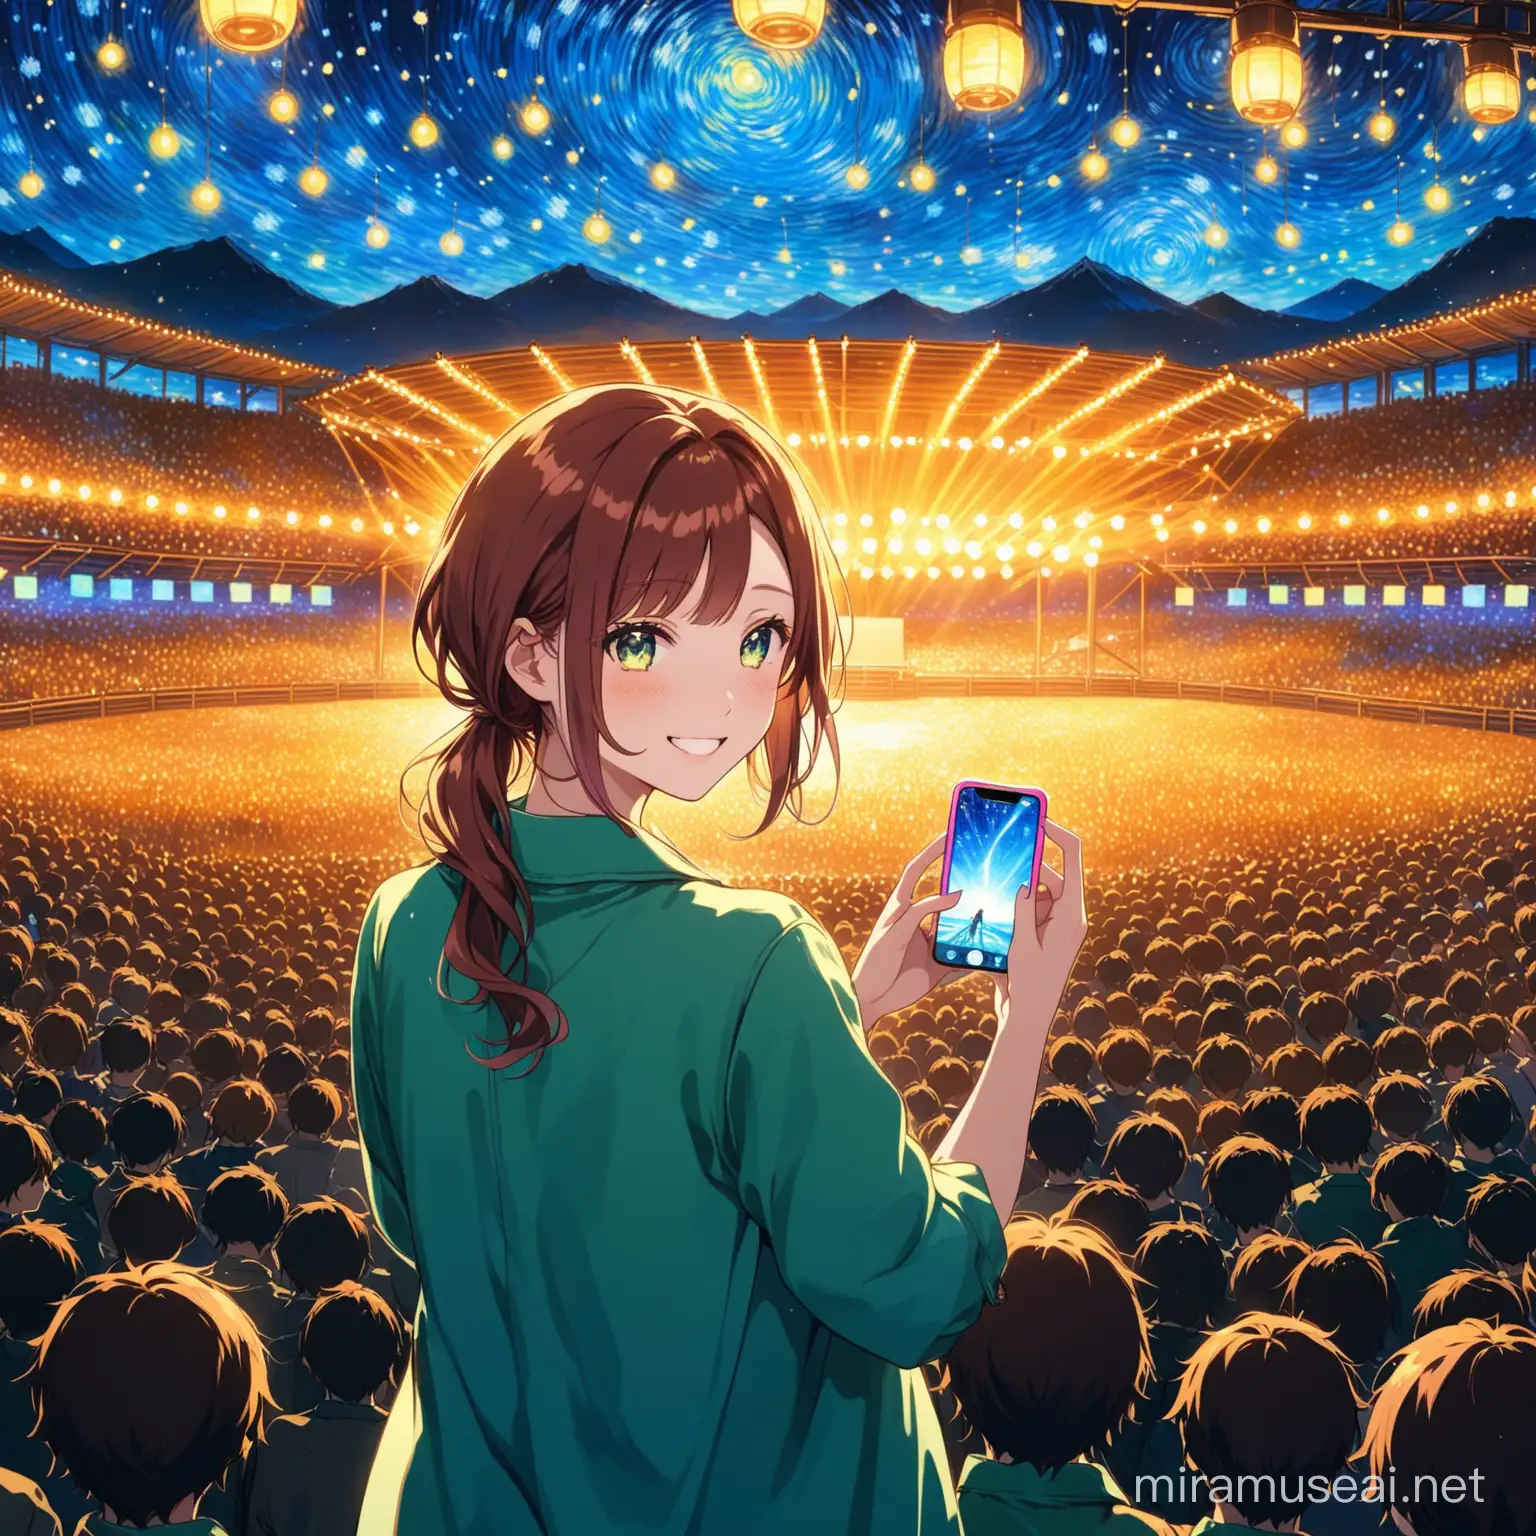 Visualize one energetic anime girl music fan, capturing concert with an iphone, holding a pink lightstick, wearing kawaii outfits, the expression is smile, she is an INFP so make sure able to express her calm attitude. She is looking at the Japanese band. The background is Japanese concert, make sure there are excited happy crowds, painting, Landscape. Best quality. Van Gogh style
